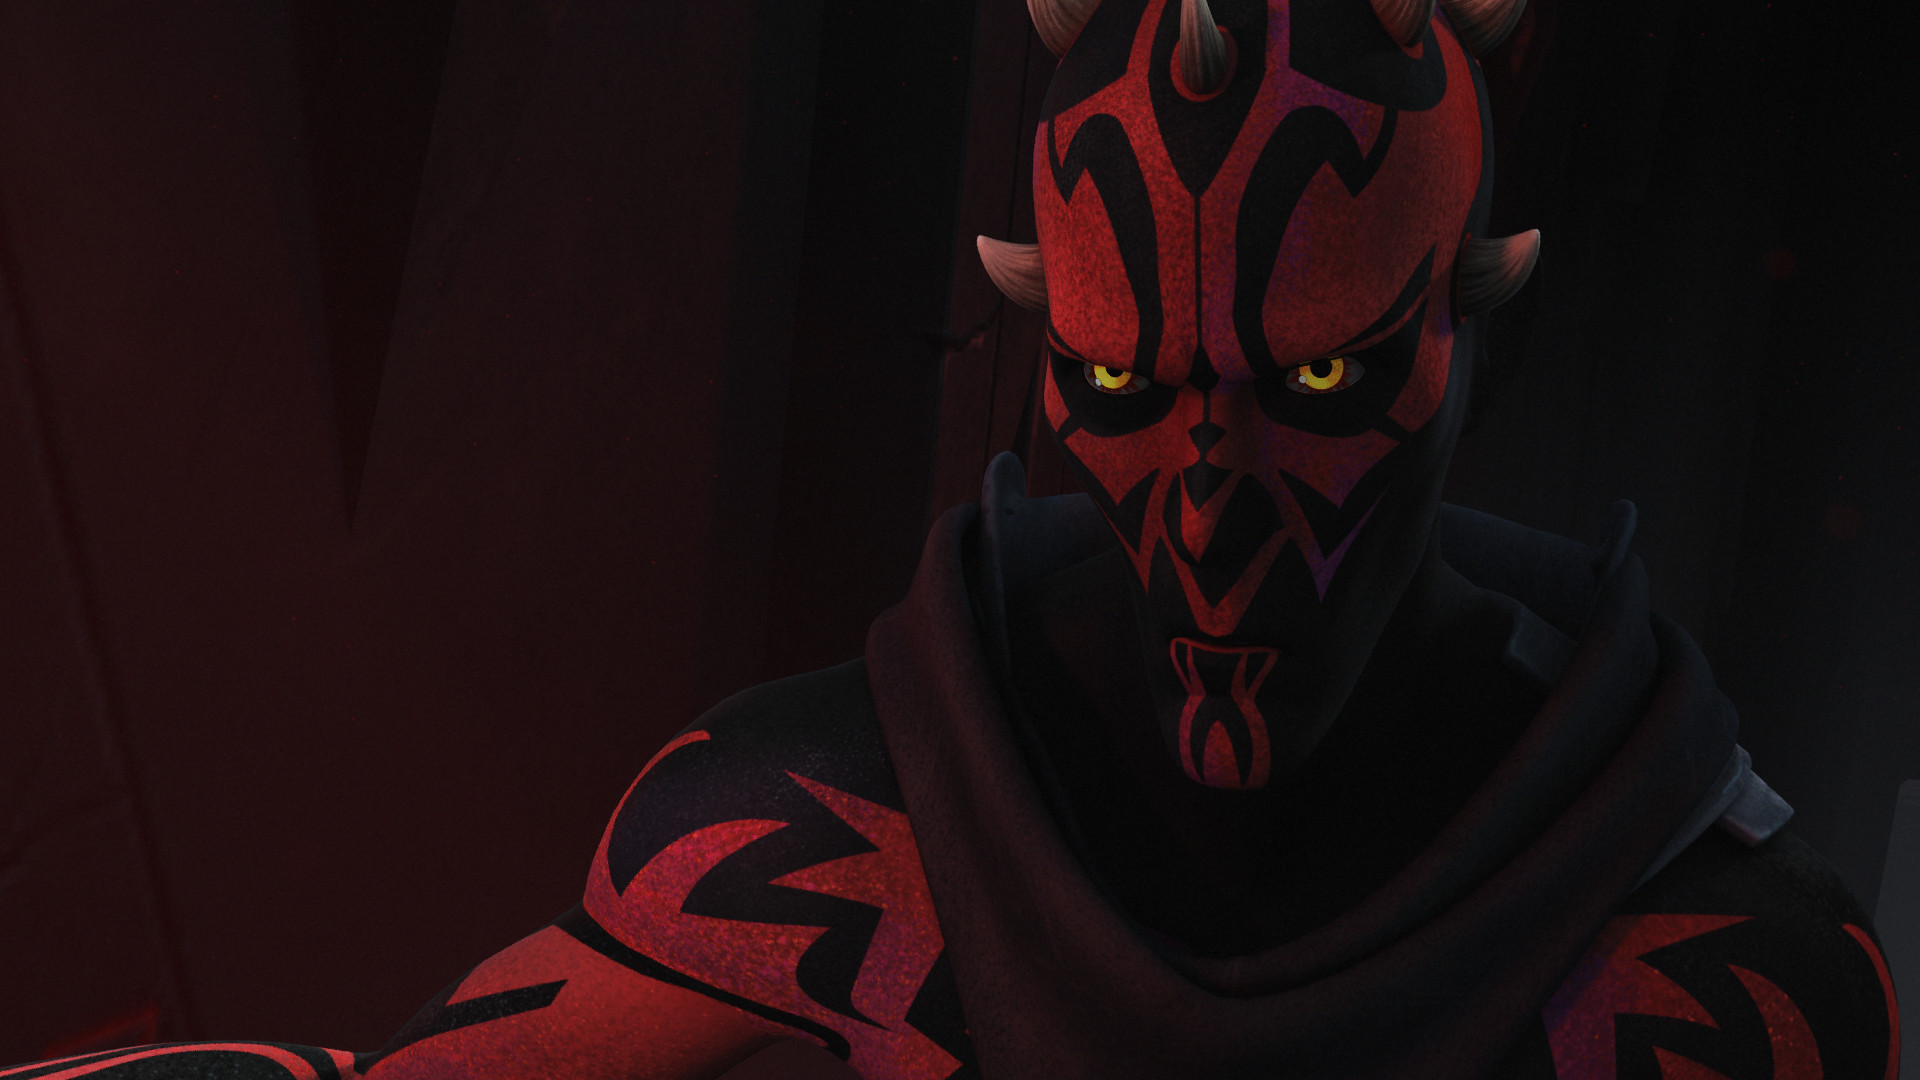 Star Wars Rebels season 2 finale is coming next week, and fans will get to see the return of Darth Maul, who is voiced by Sam Witwer Star Wars The Force